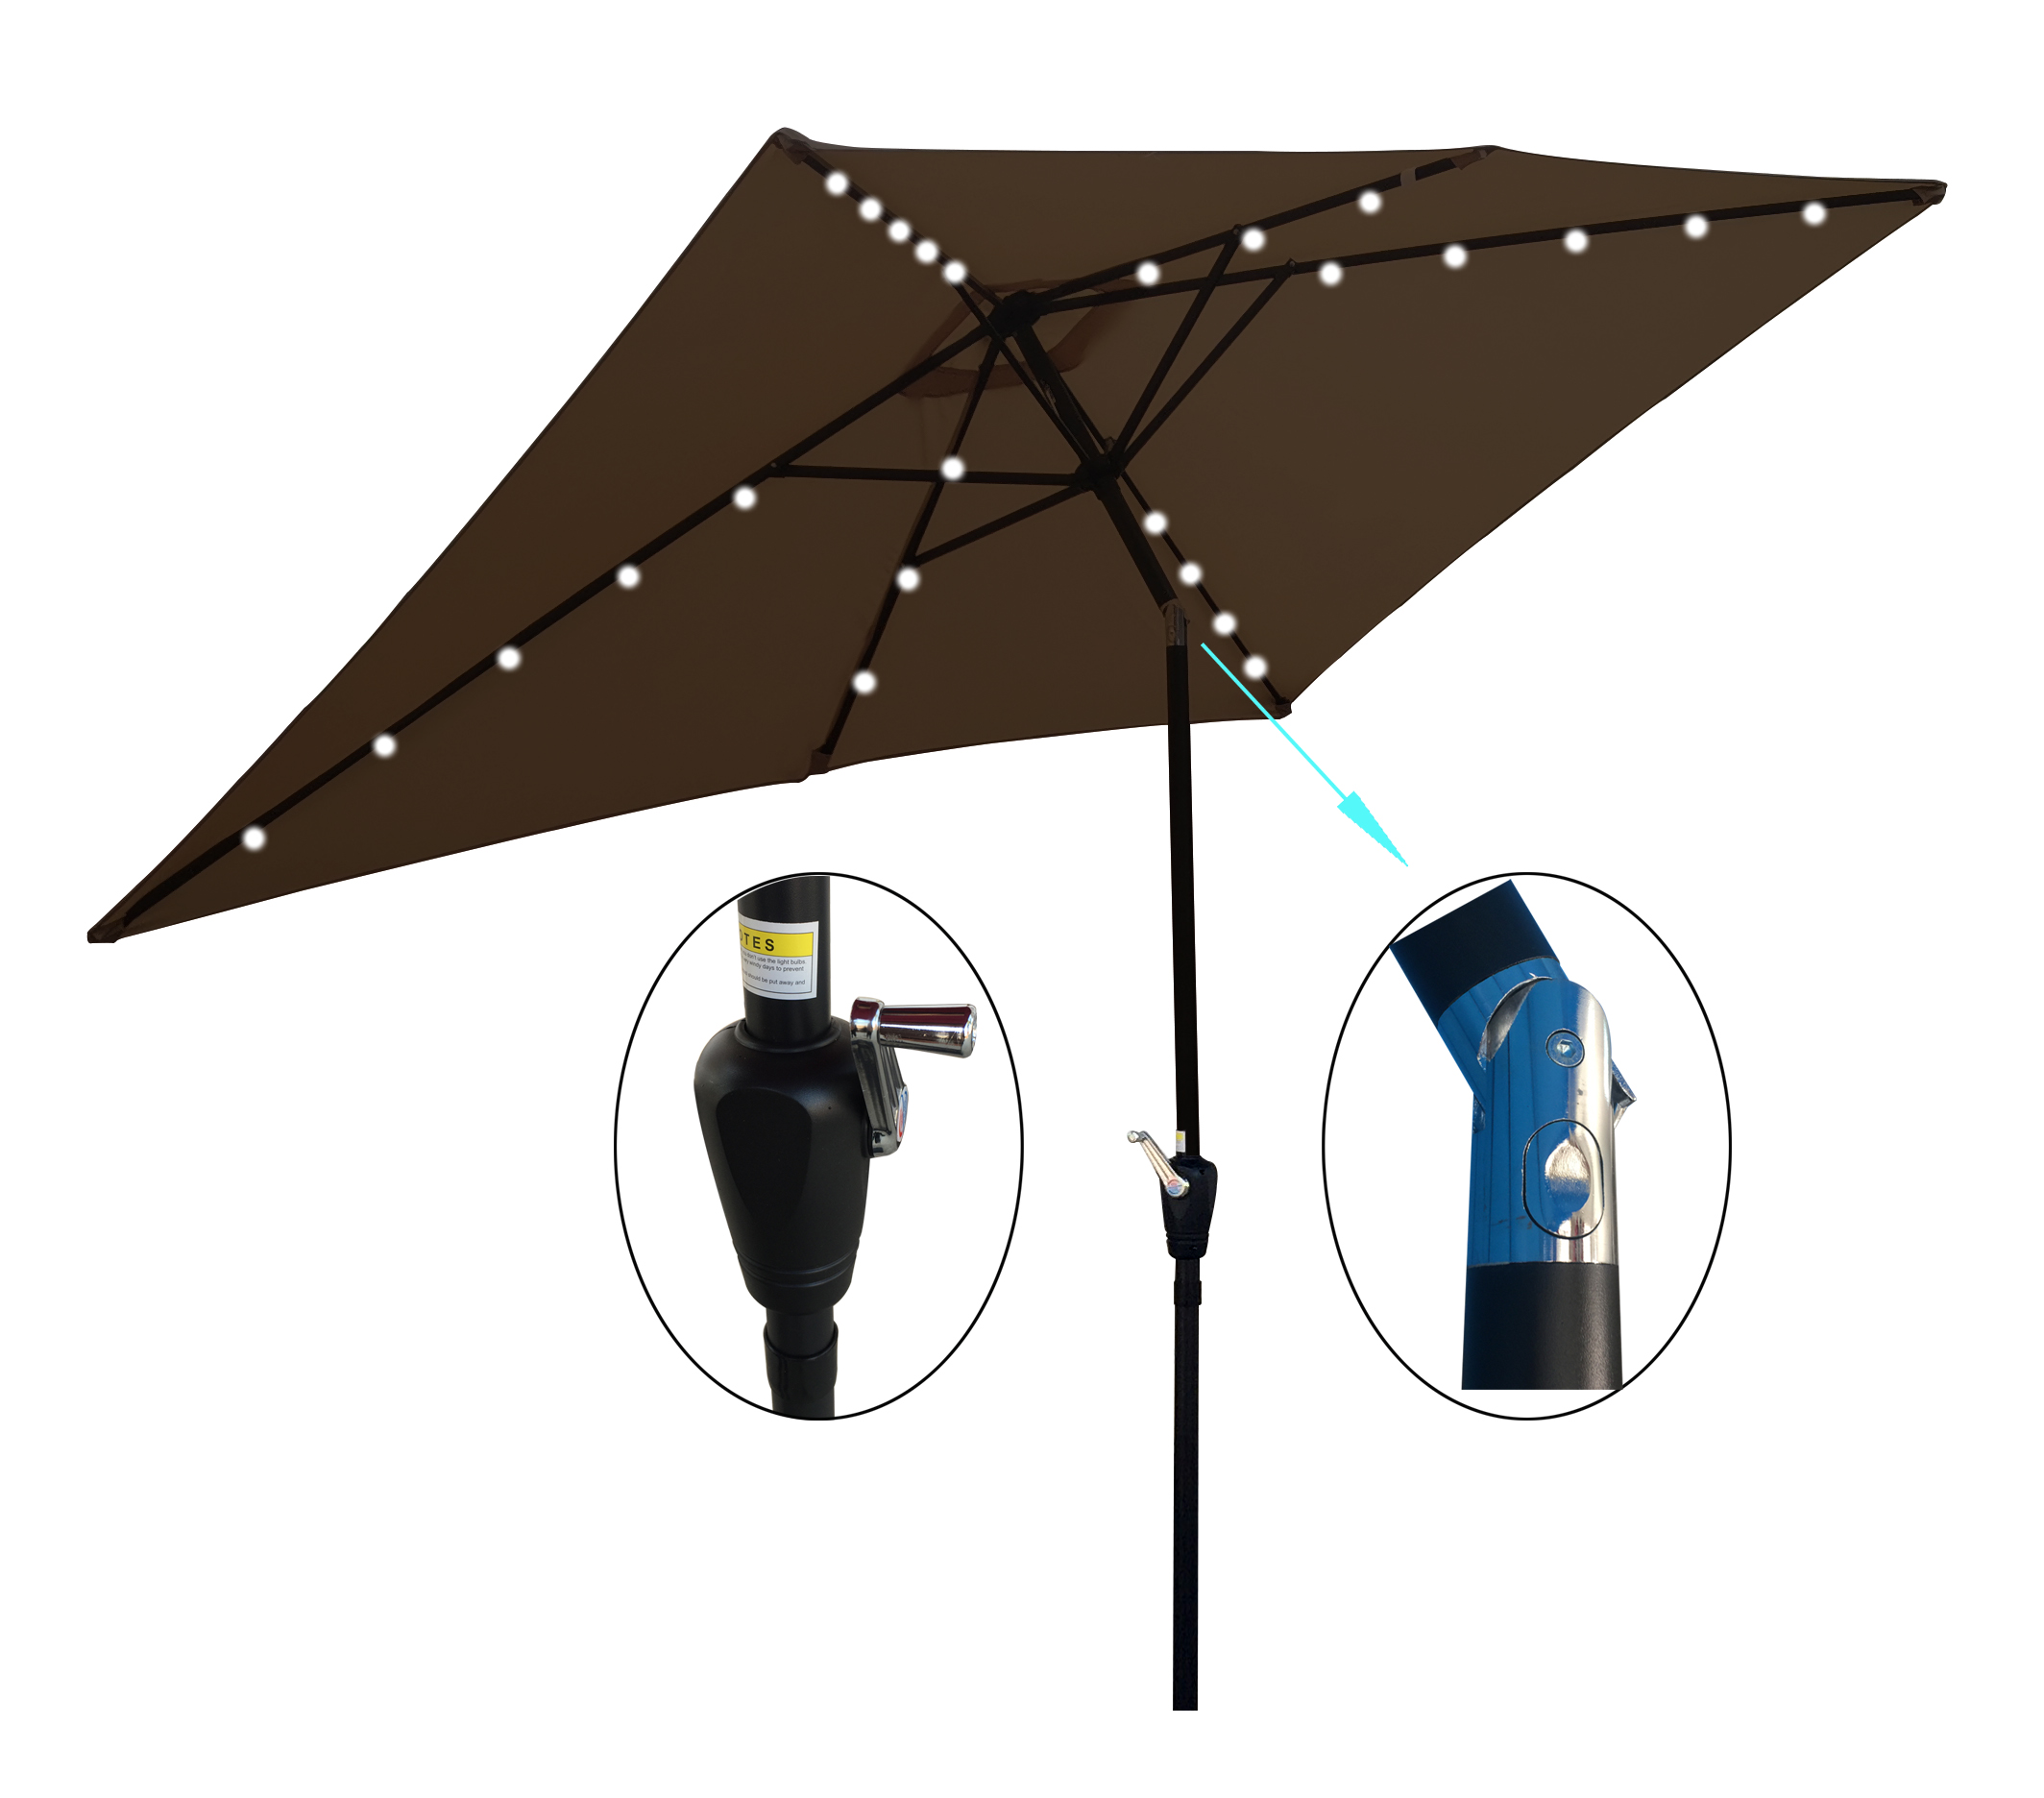 10 x 6.5t Rectangular Patio Umbrella Solar LED Lighted Outdoor Market Table Waterproof Umbrellas Sunshade with Crank and Push Button Tilt for Garden Deck Backyard Pool Shade Outside Deck Swimming Pool-Boyel Living